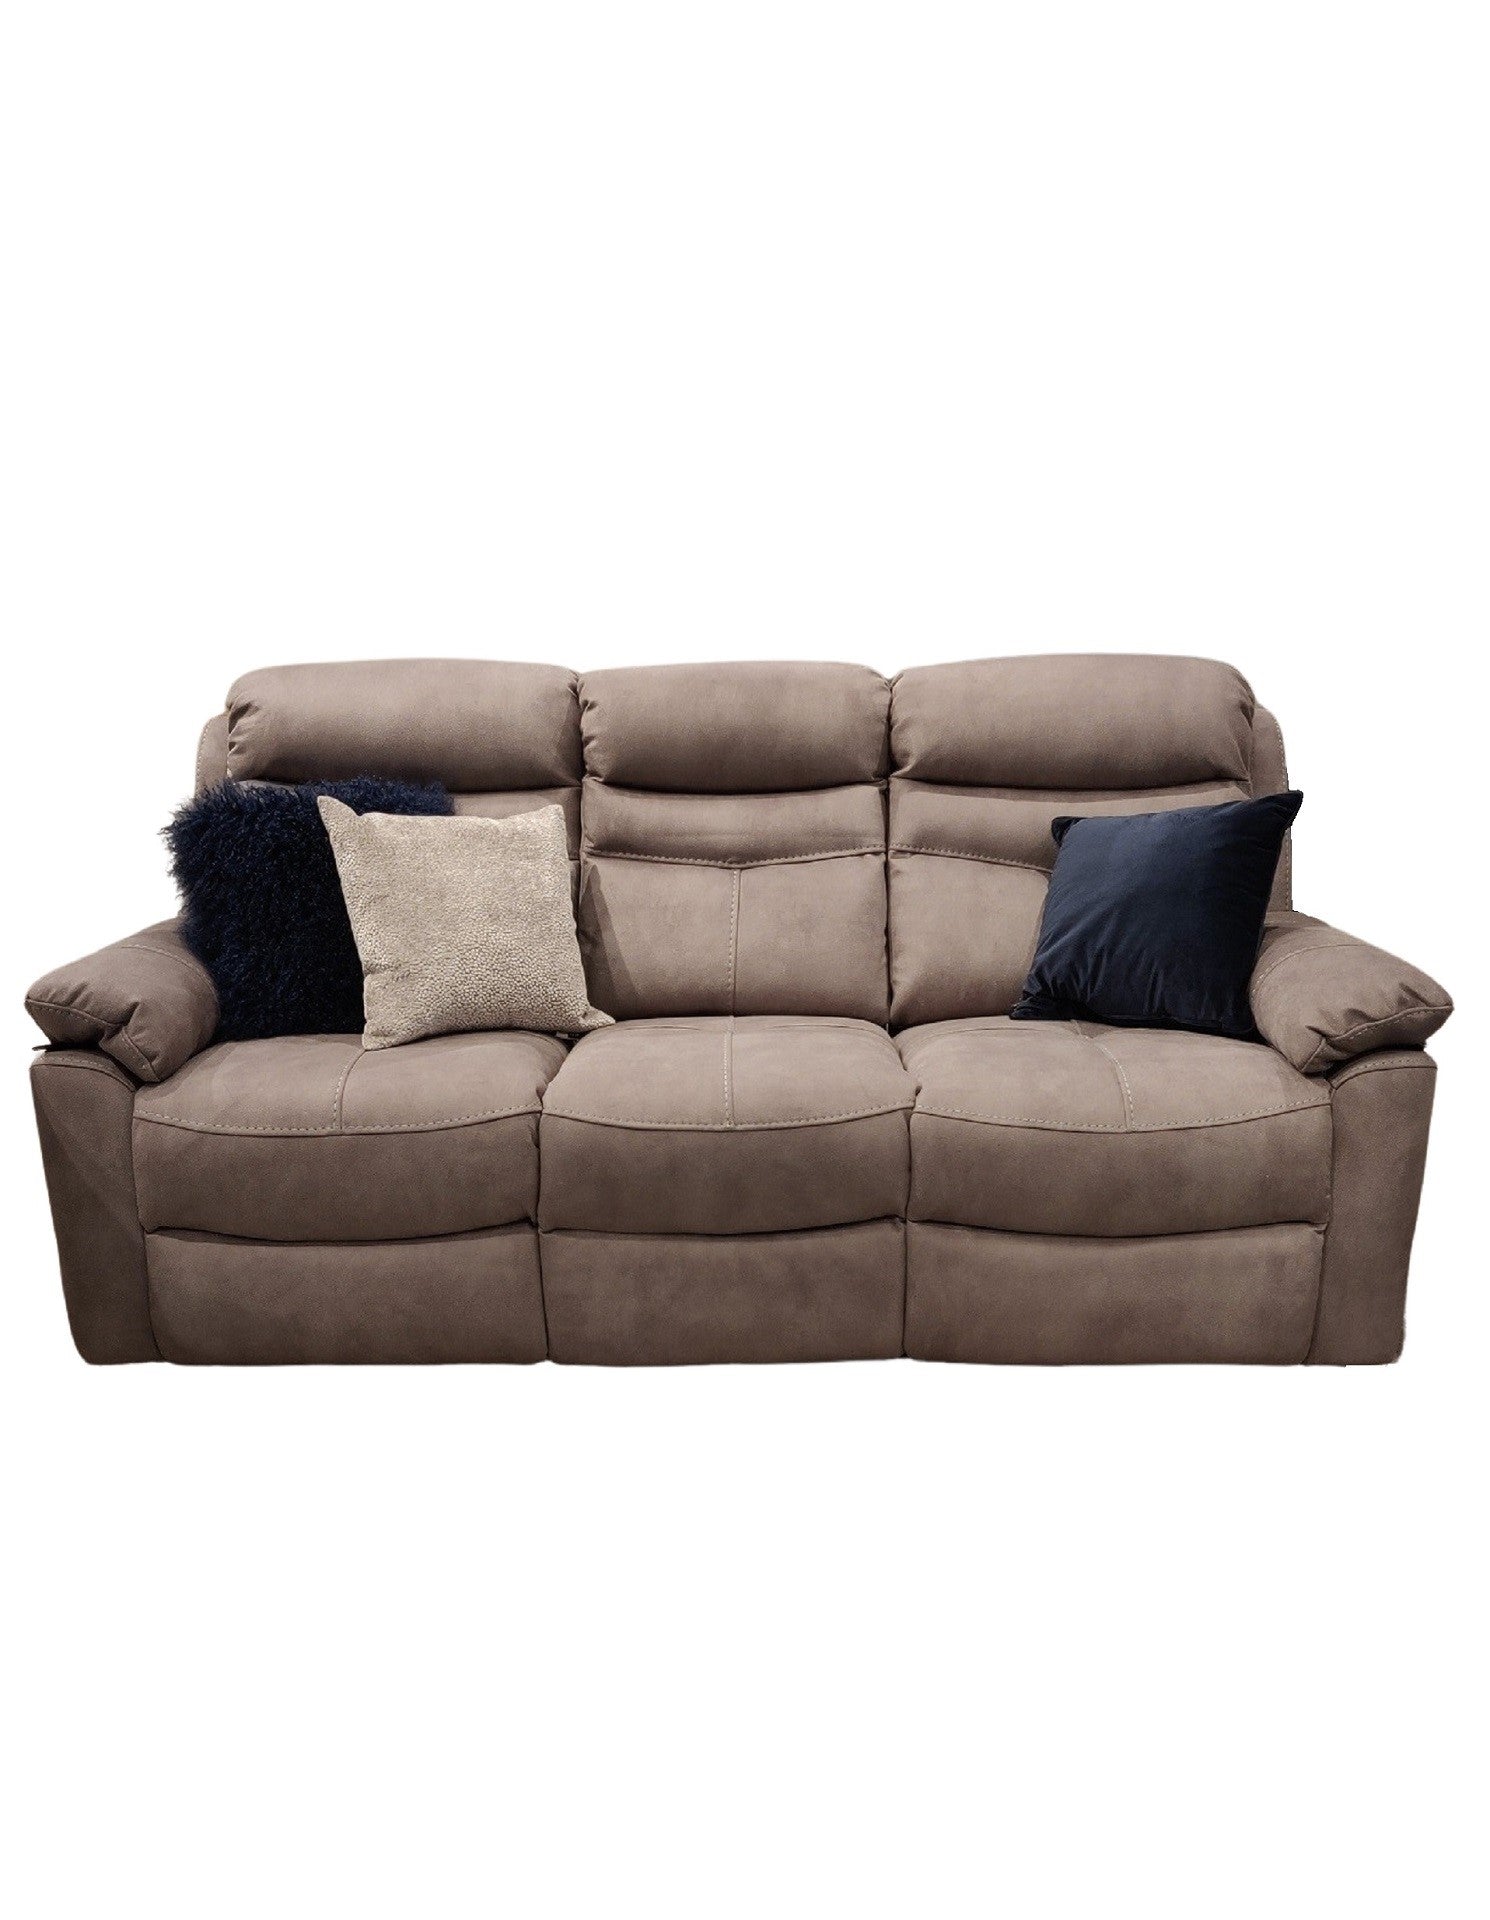 Lucy 3 Seater Recliner Grey